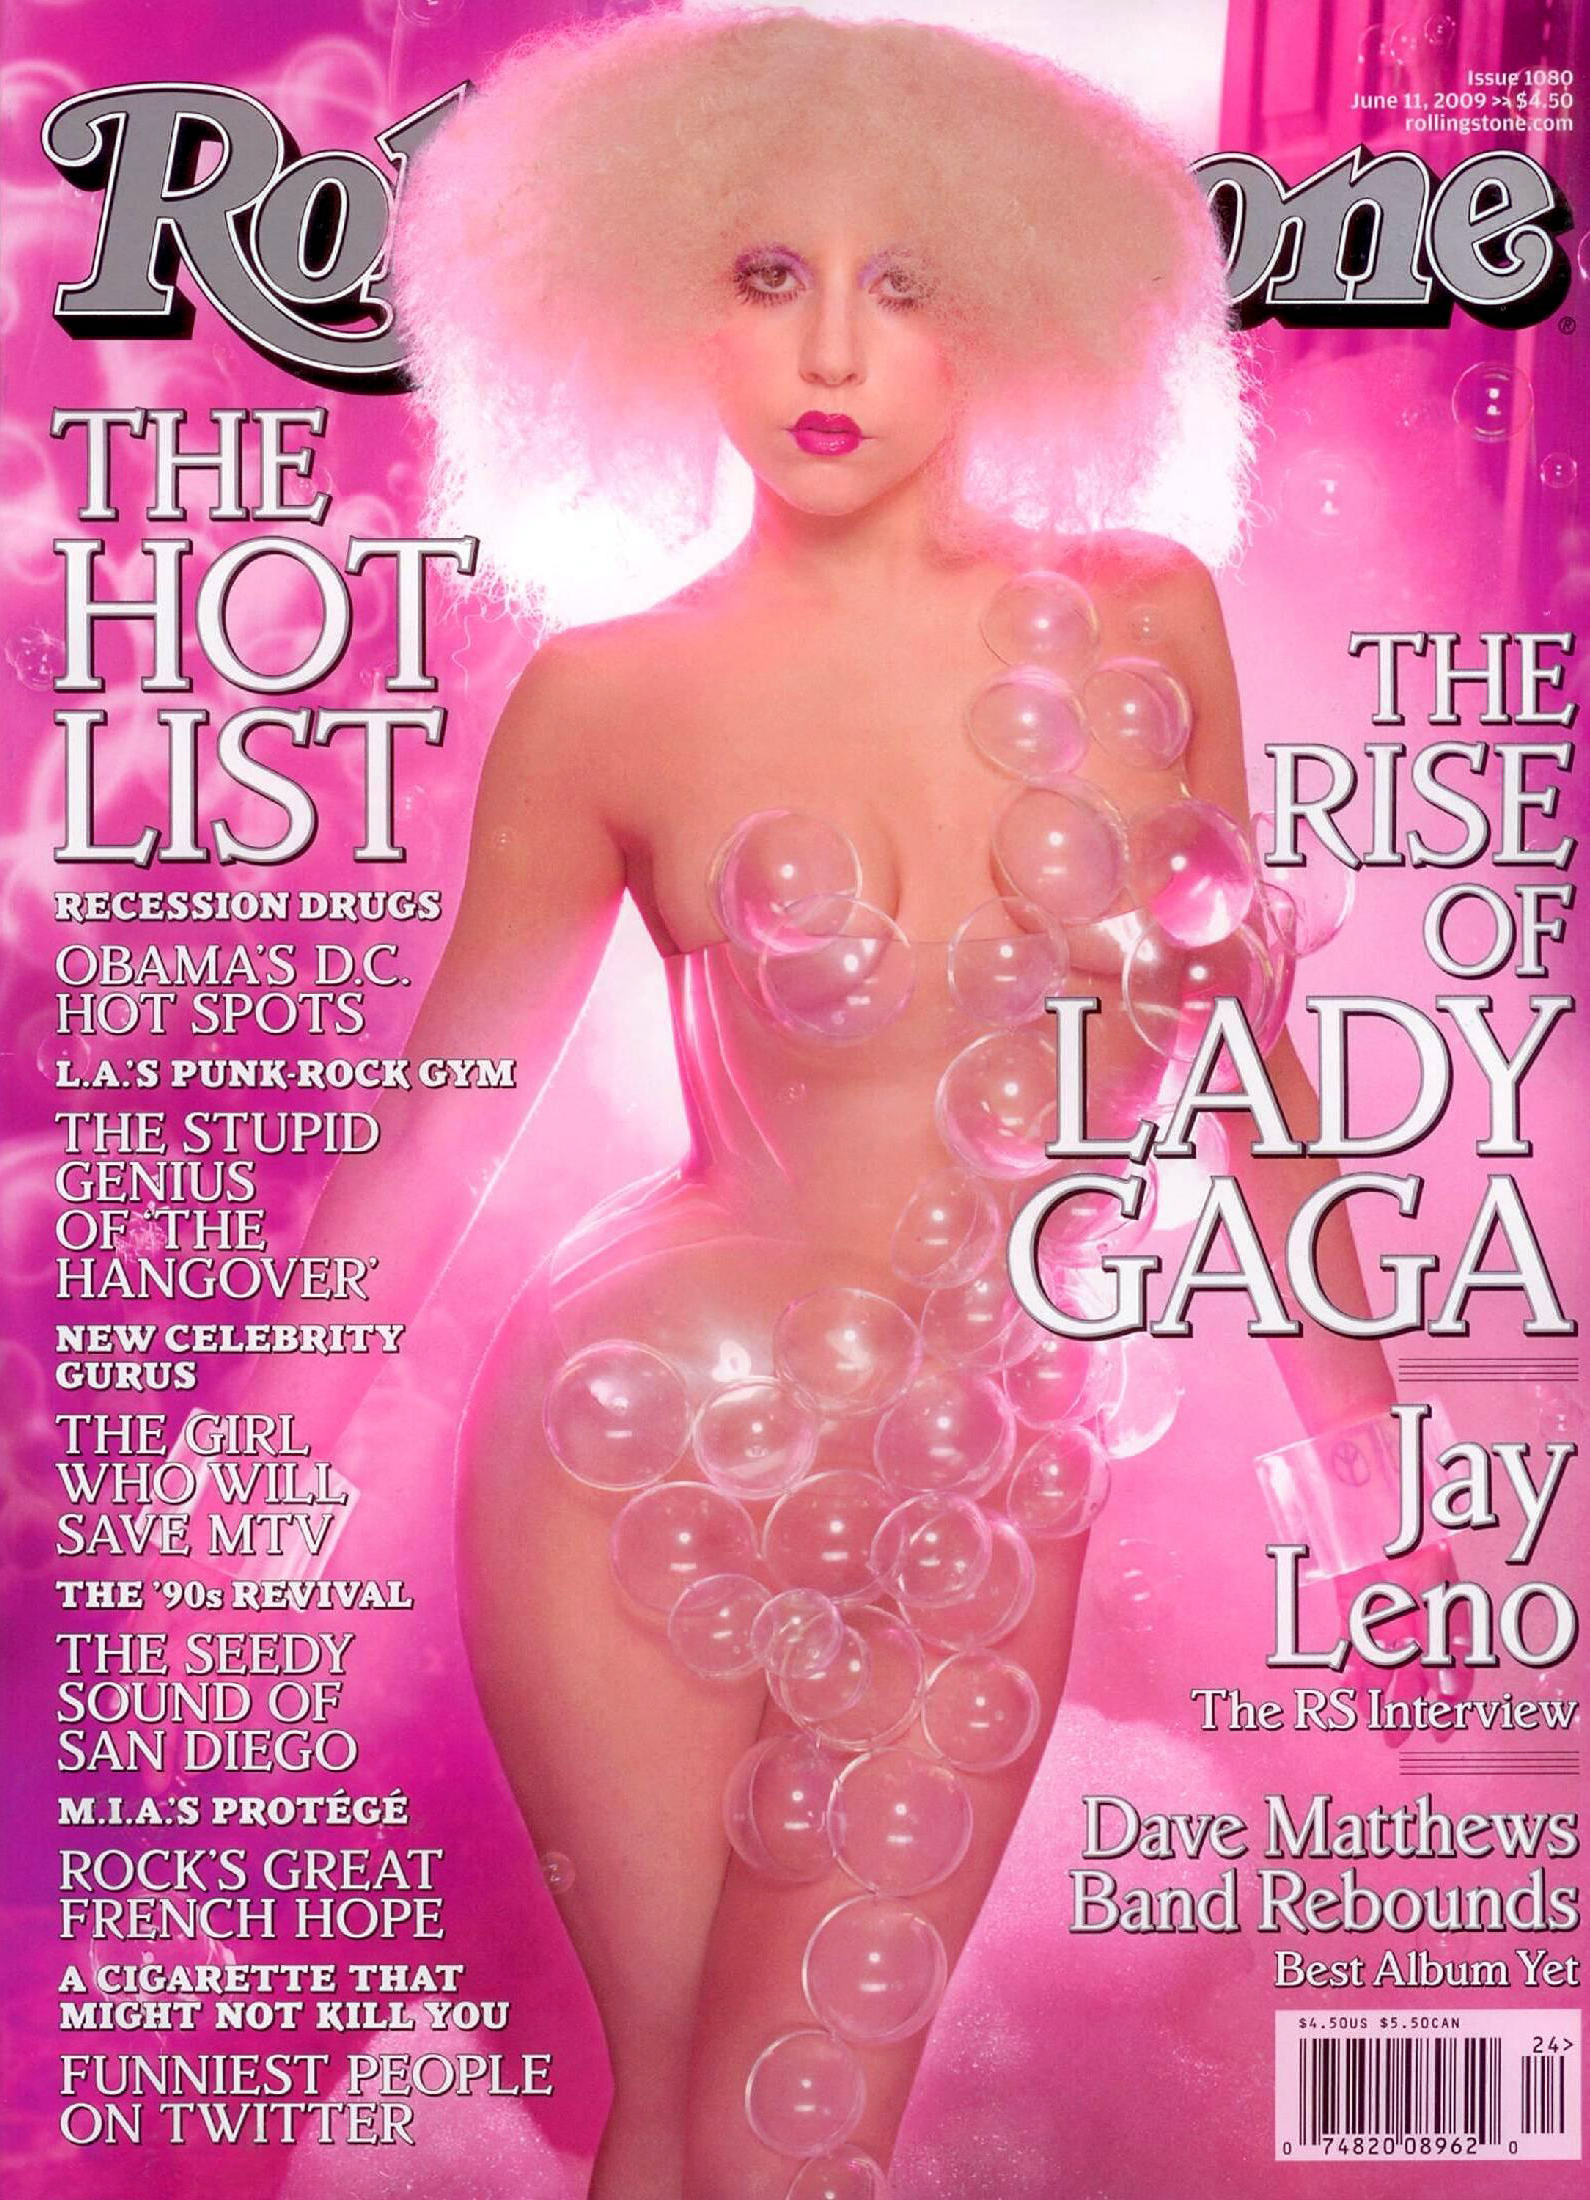 Lady Gaga as appeared on the Rolling Stone Magazine cover of June 11, 2009.